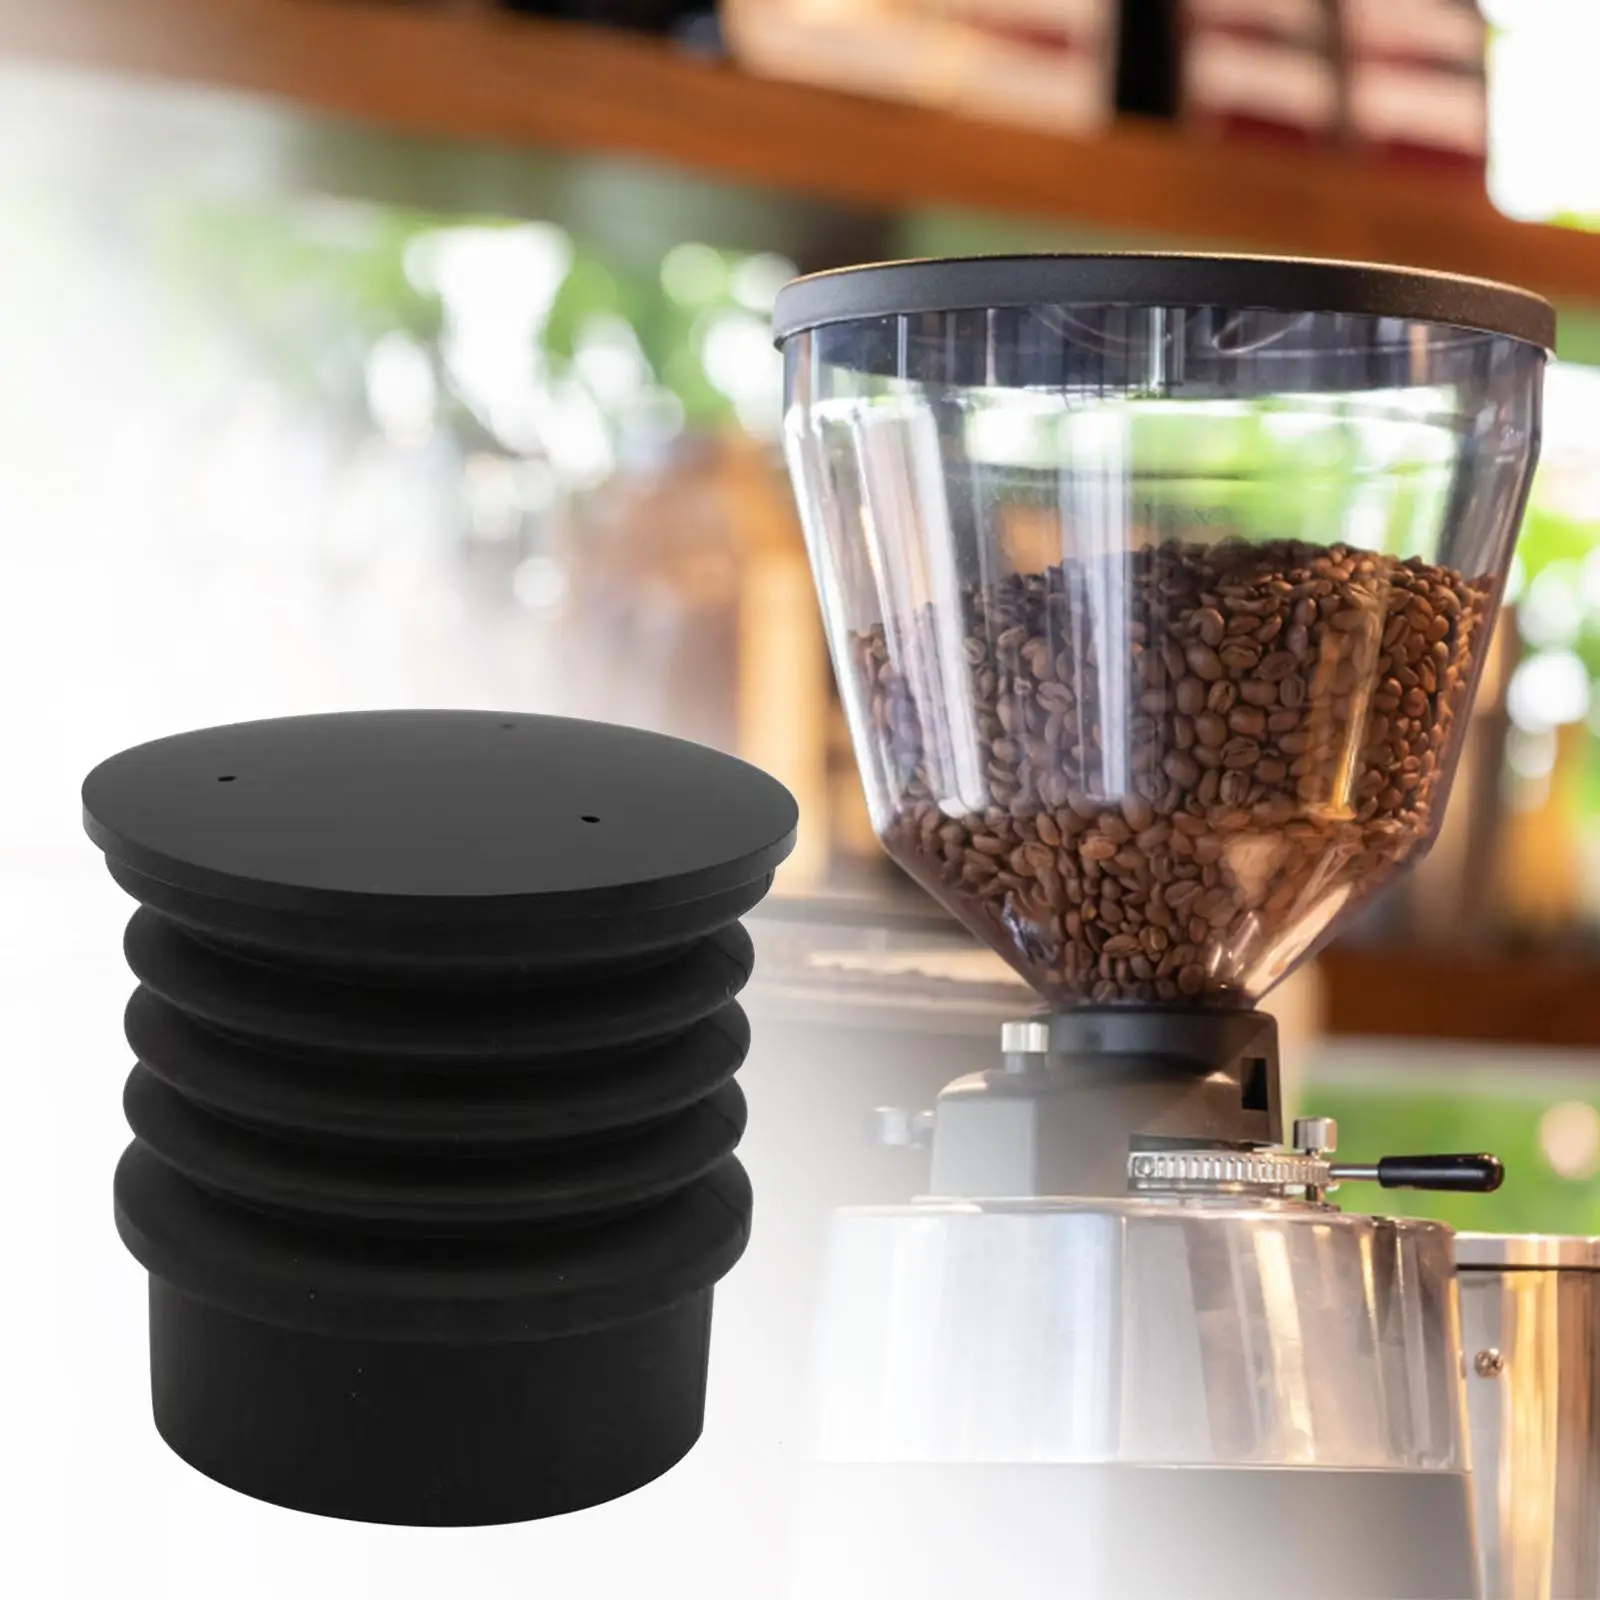 Grinder Blowing Bean Bins Coffee Grinder Cleaning Tool Coffee Beans Grinder Single Coffee Machine Accessory Replacement